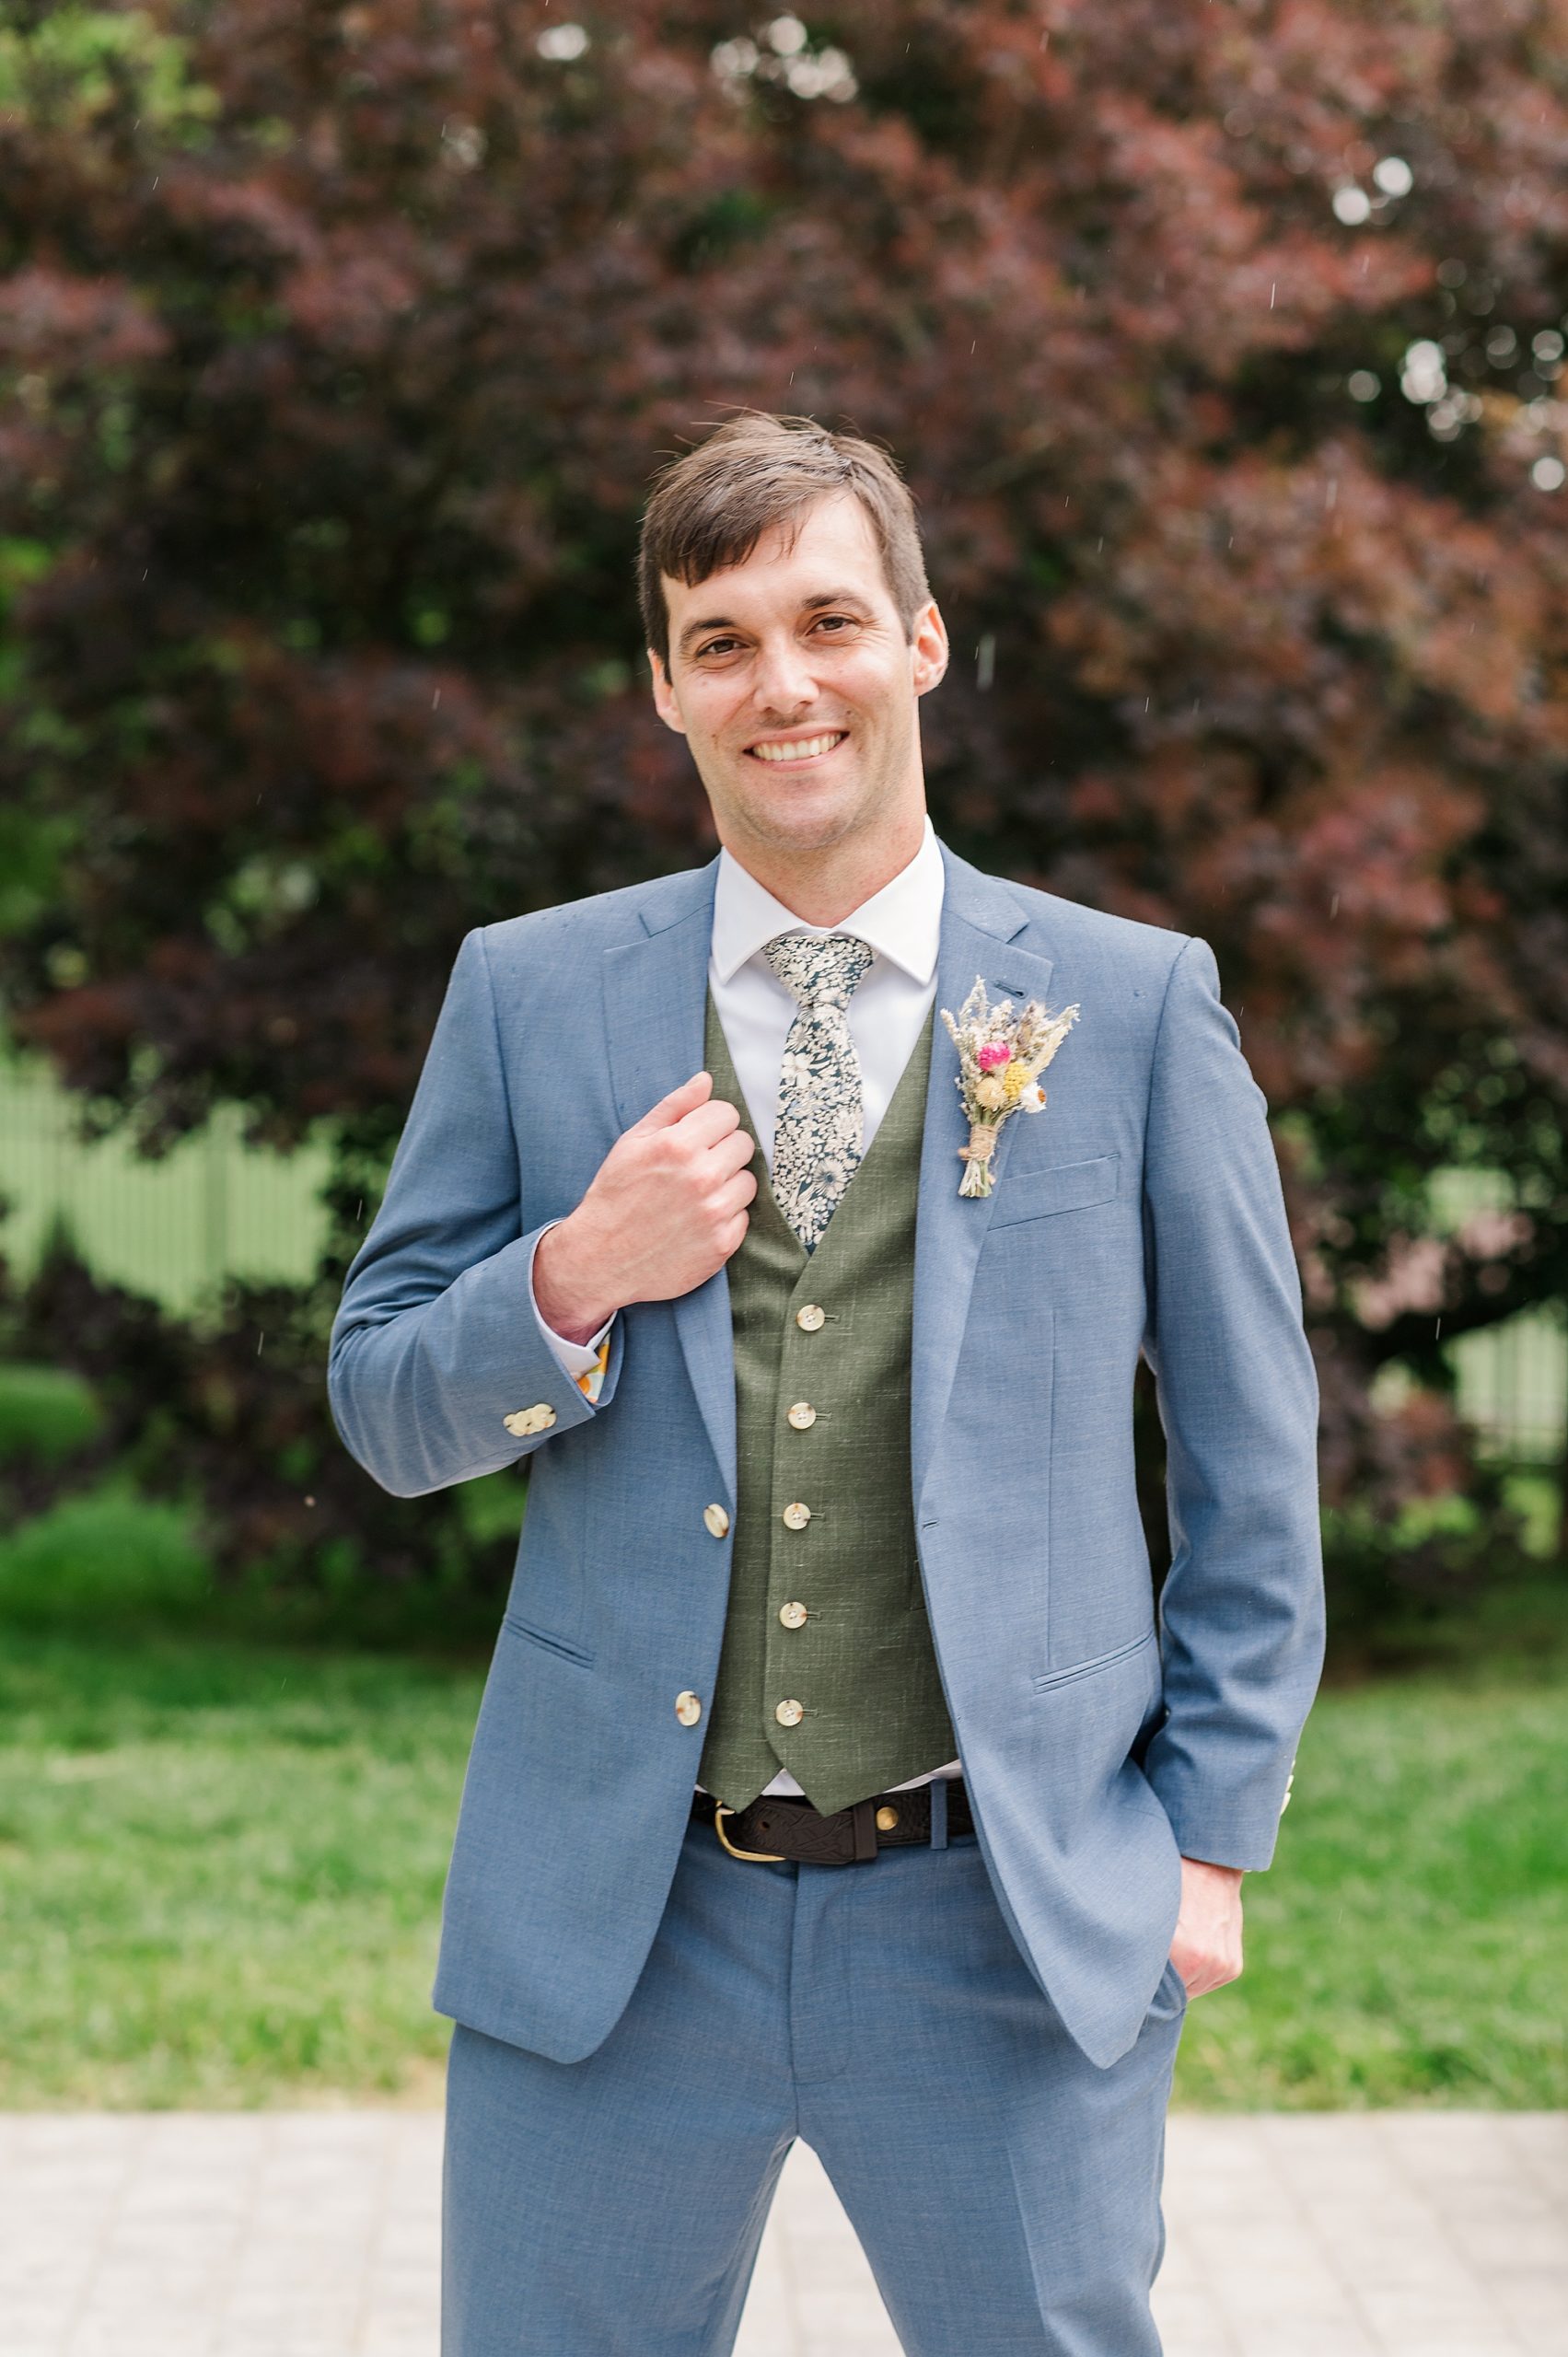 Groom Photos at Wedding at Virginia Tech. Wedding Photography by Kailey Brianne Photography